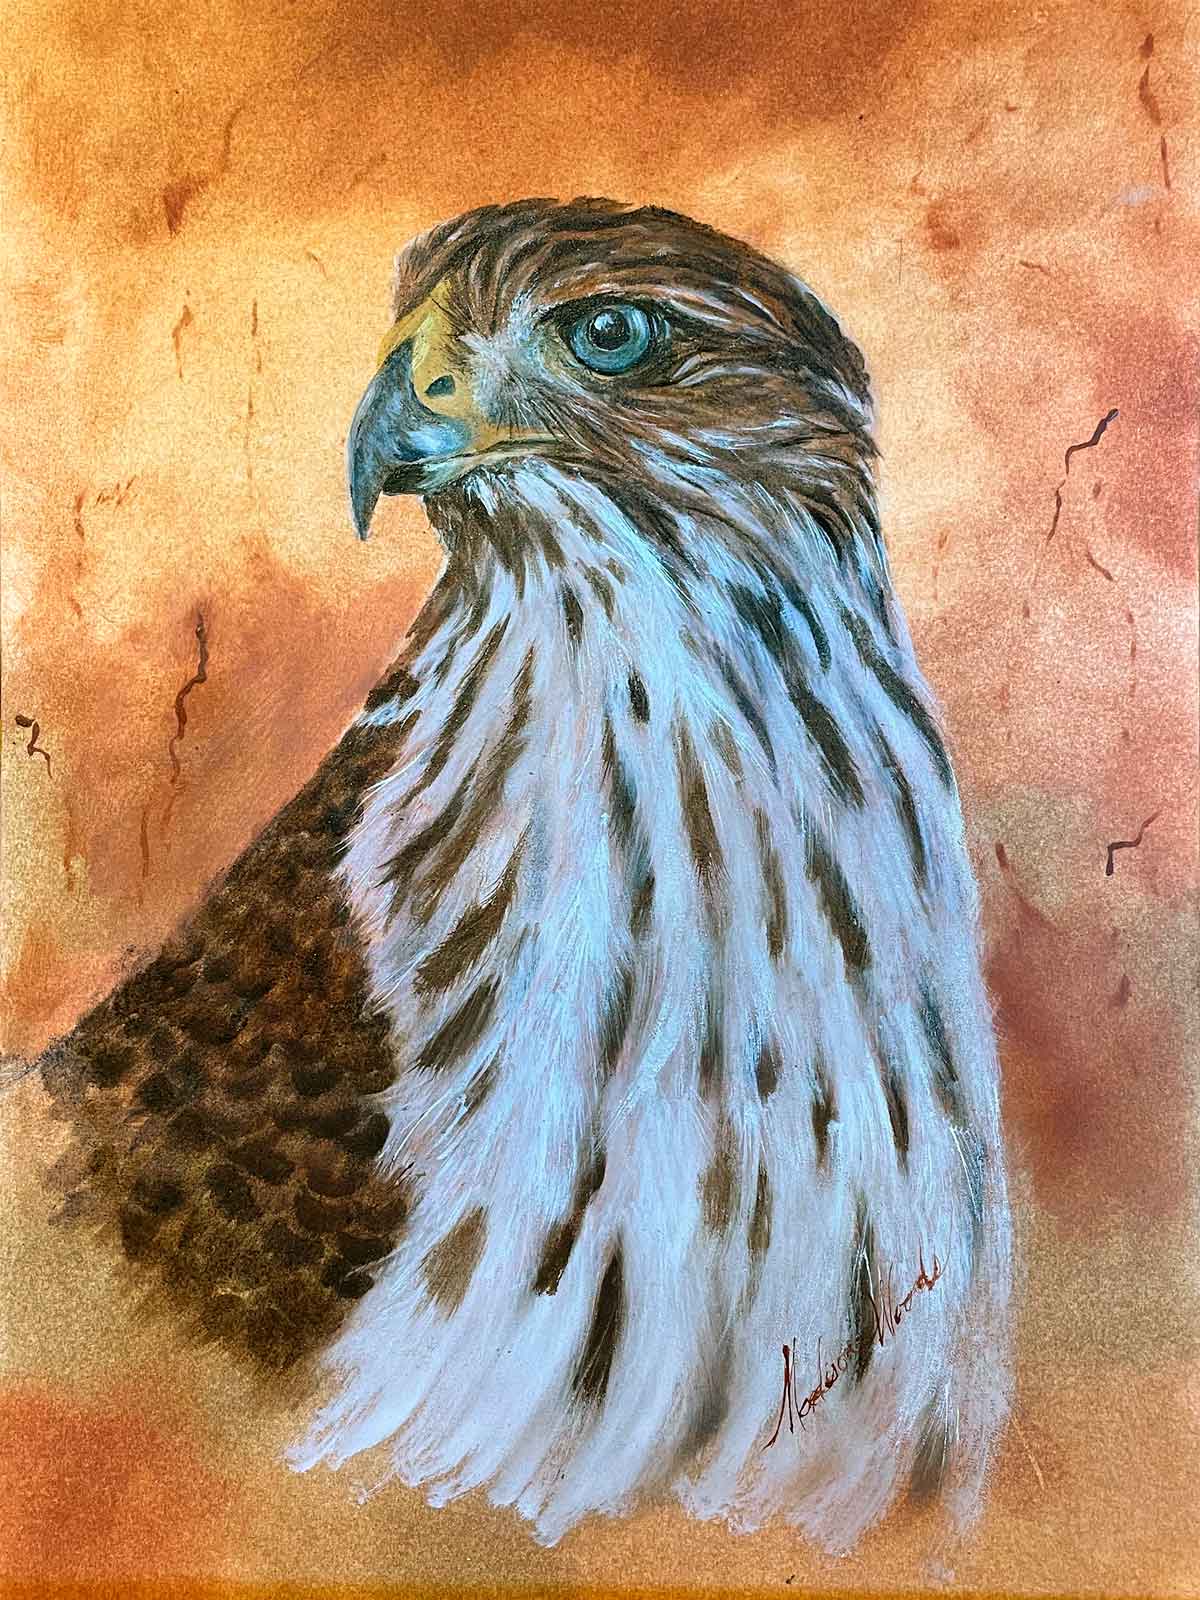 An original oil painting of a Cooper's hawk by Madison Woods.